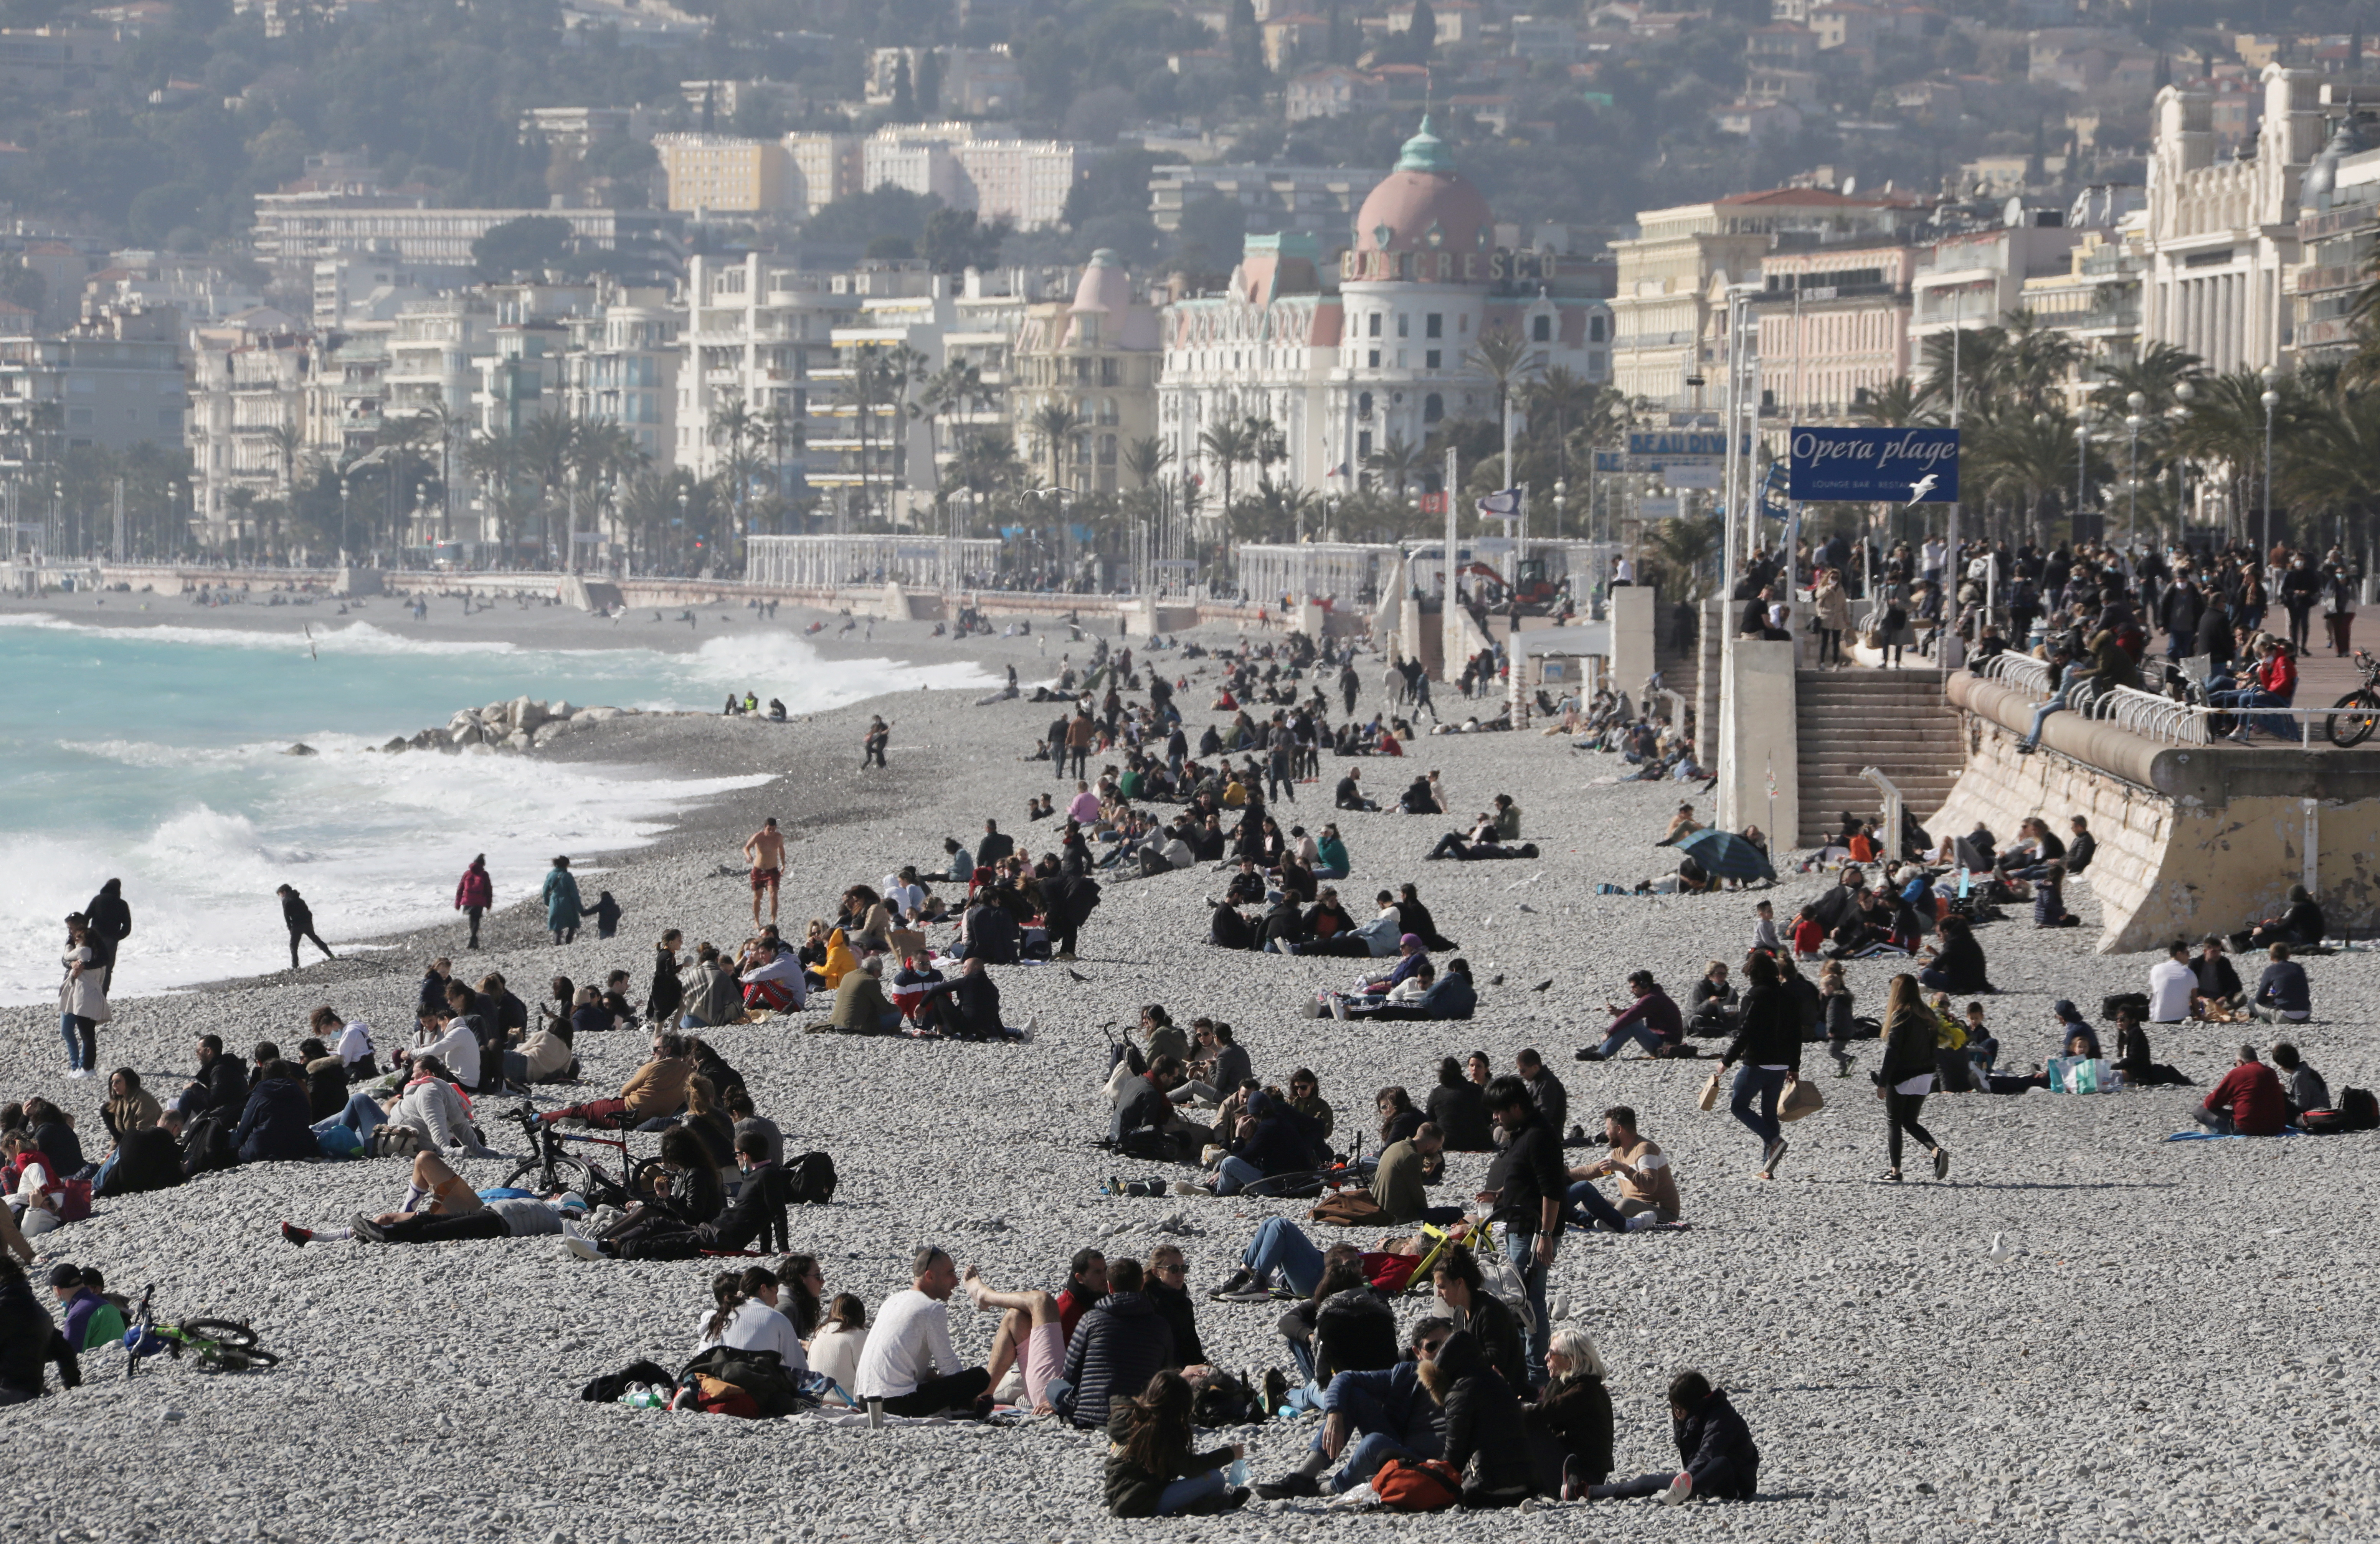 People sit on the beach of the Promenade des Anglais in Nice